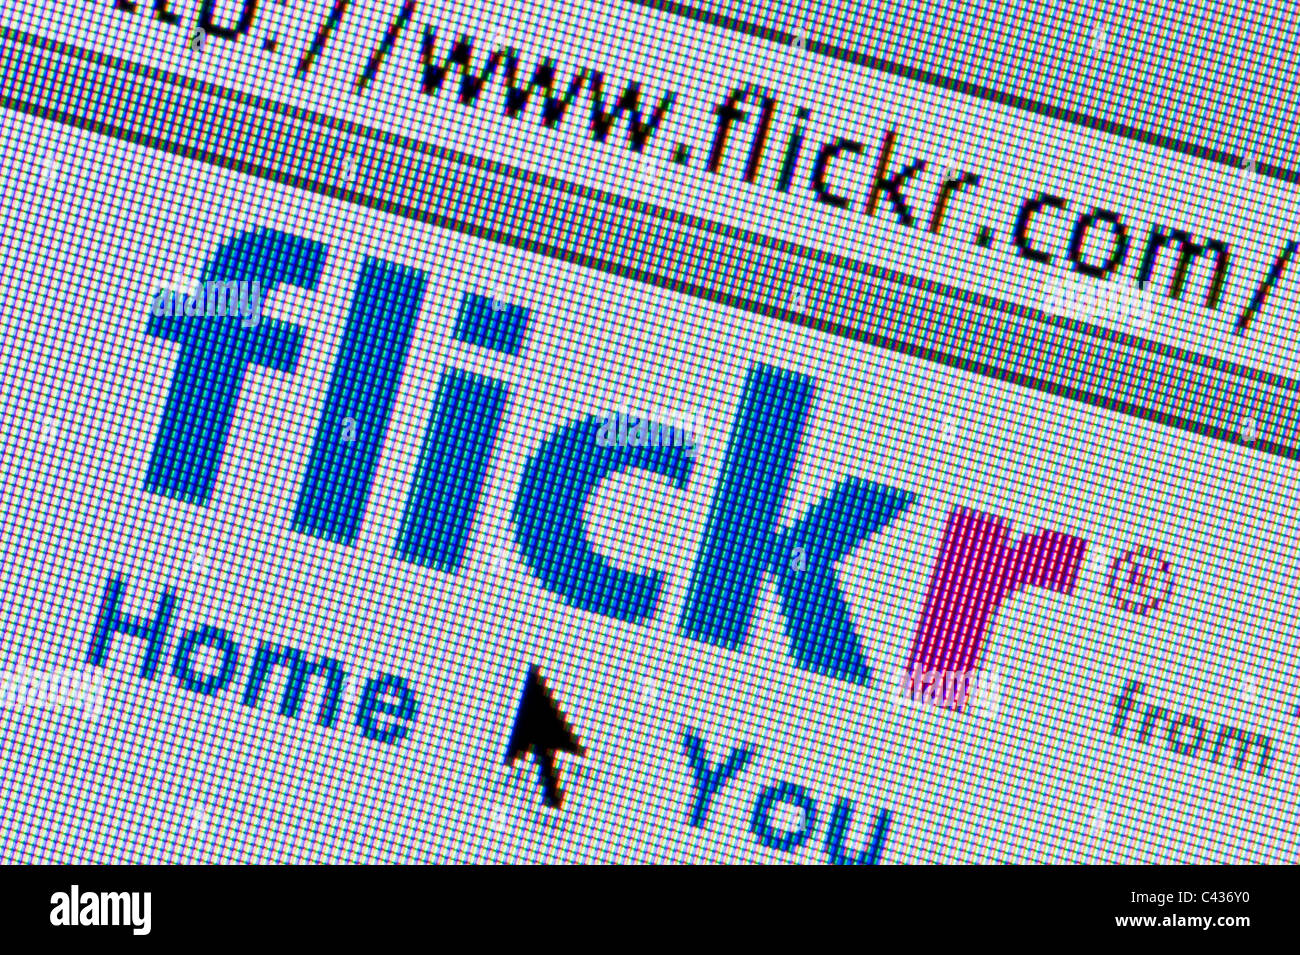 Close up of the Flickr as seen on its website. (Editorial use only: print, TV, e-book and editorial website). Stock Photo